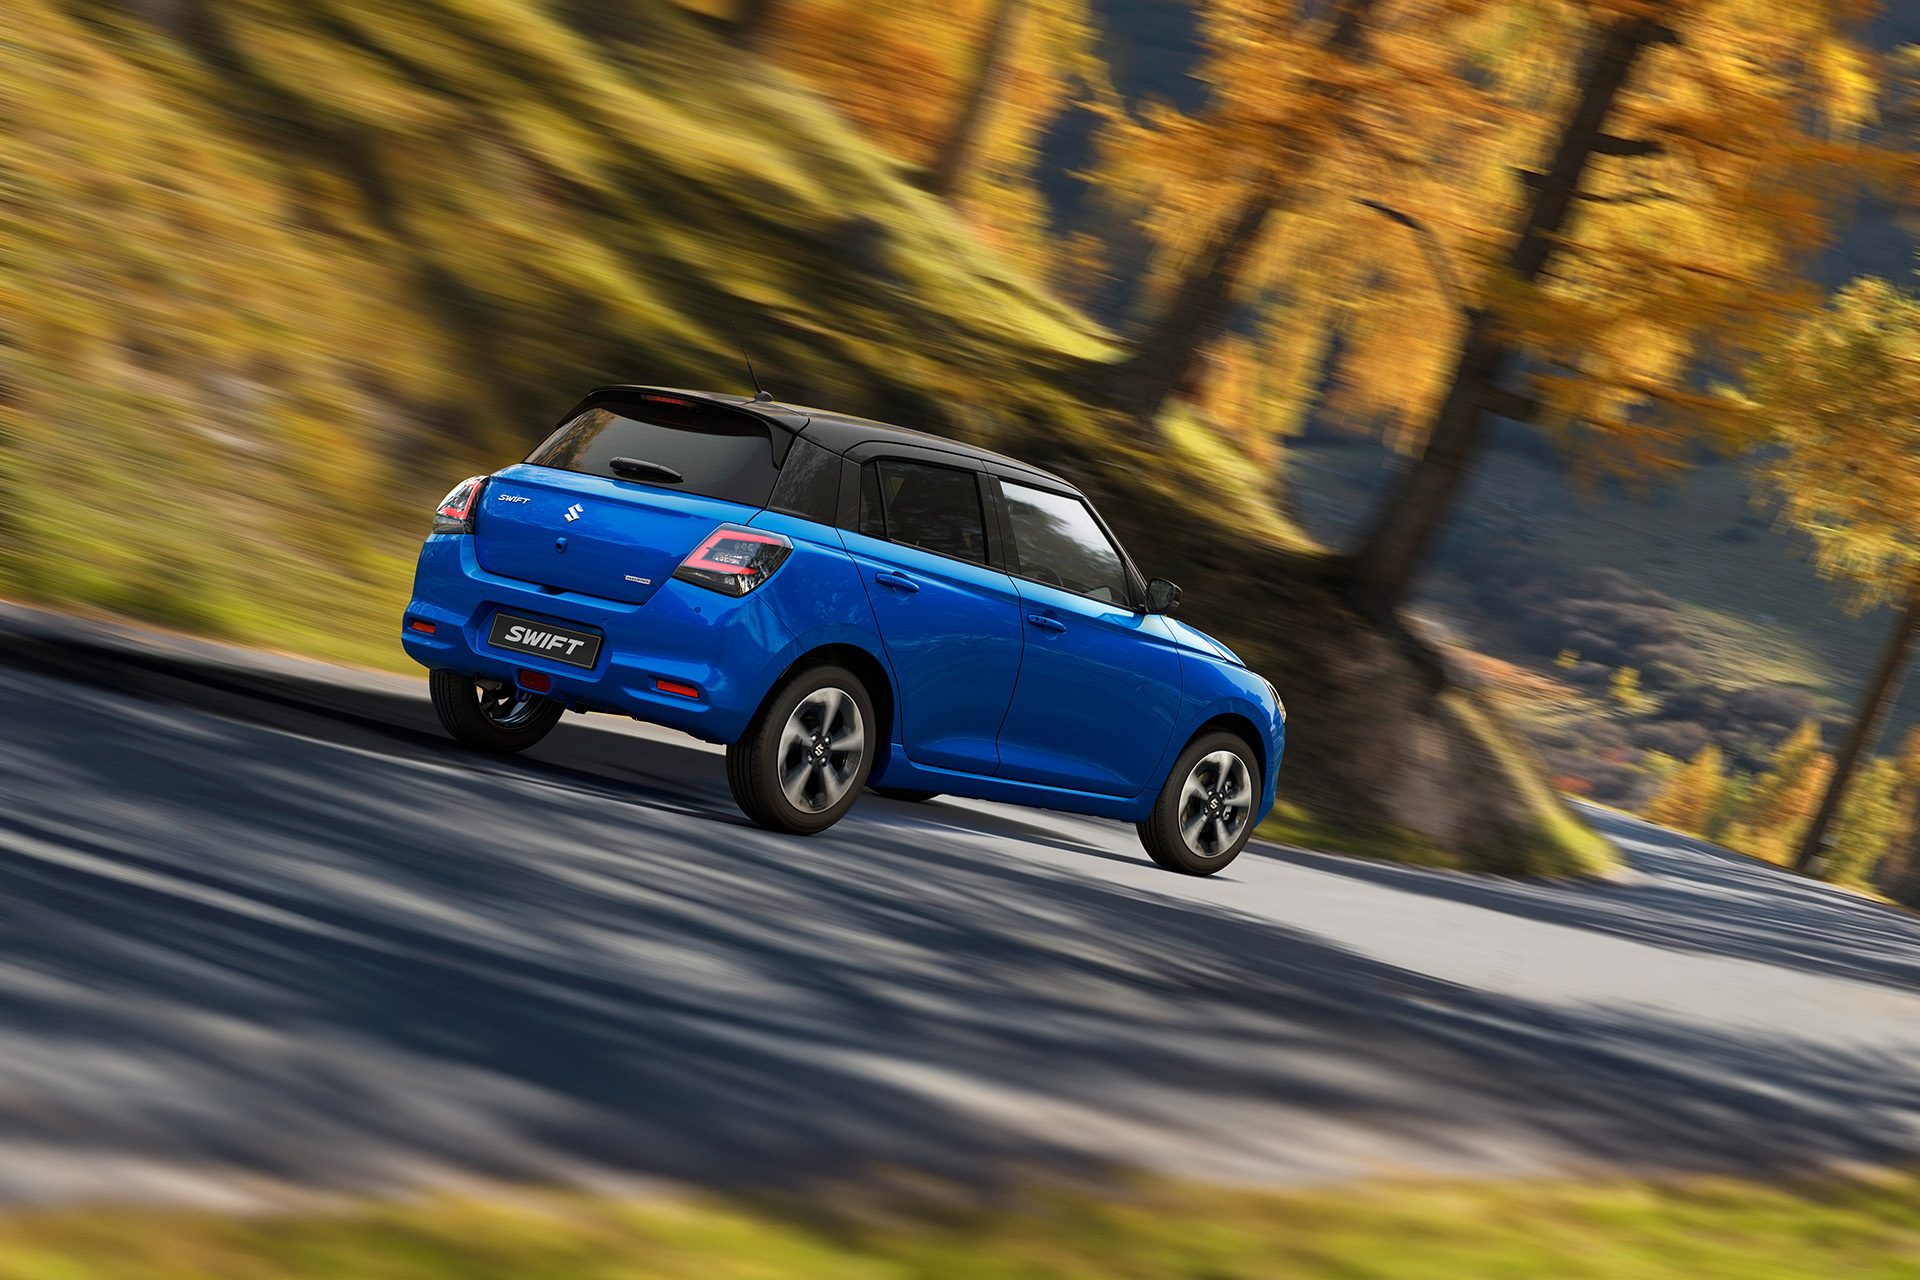 New Swift tearing up a winding road.